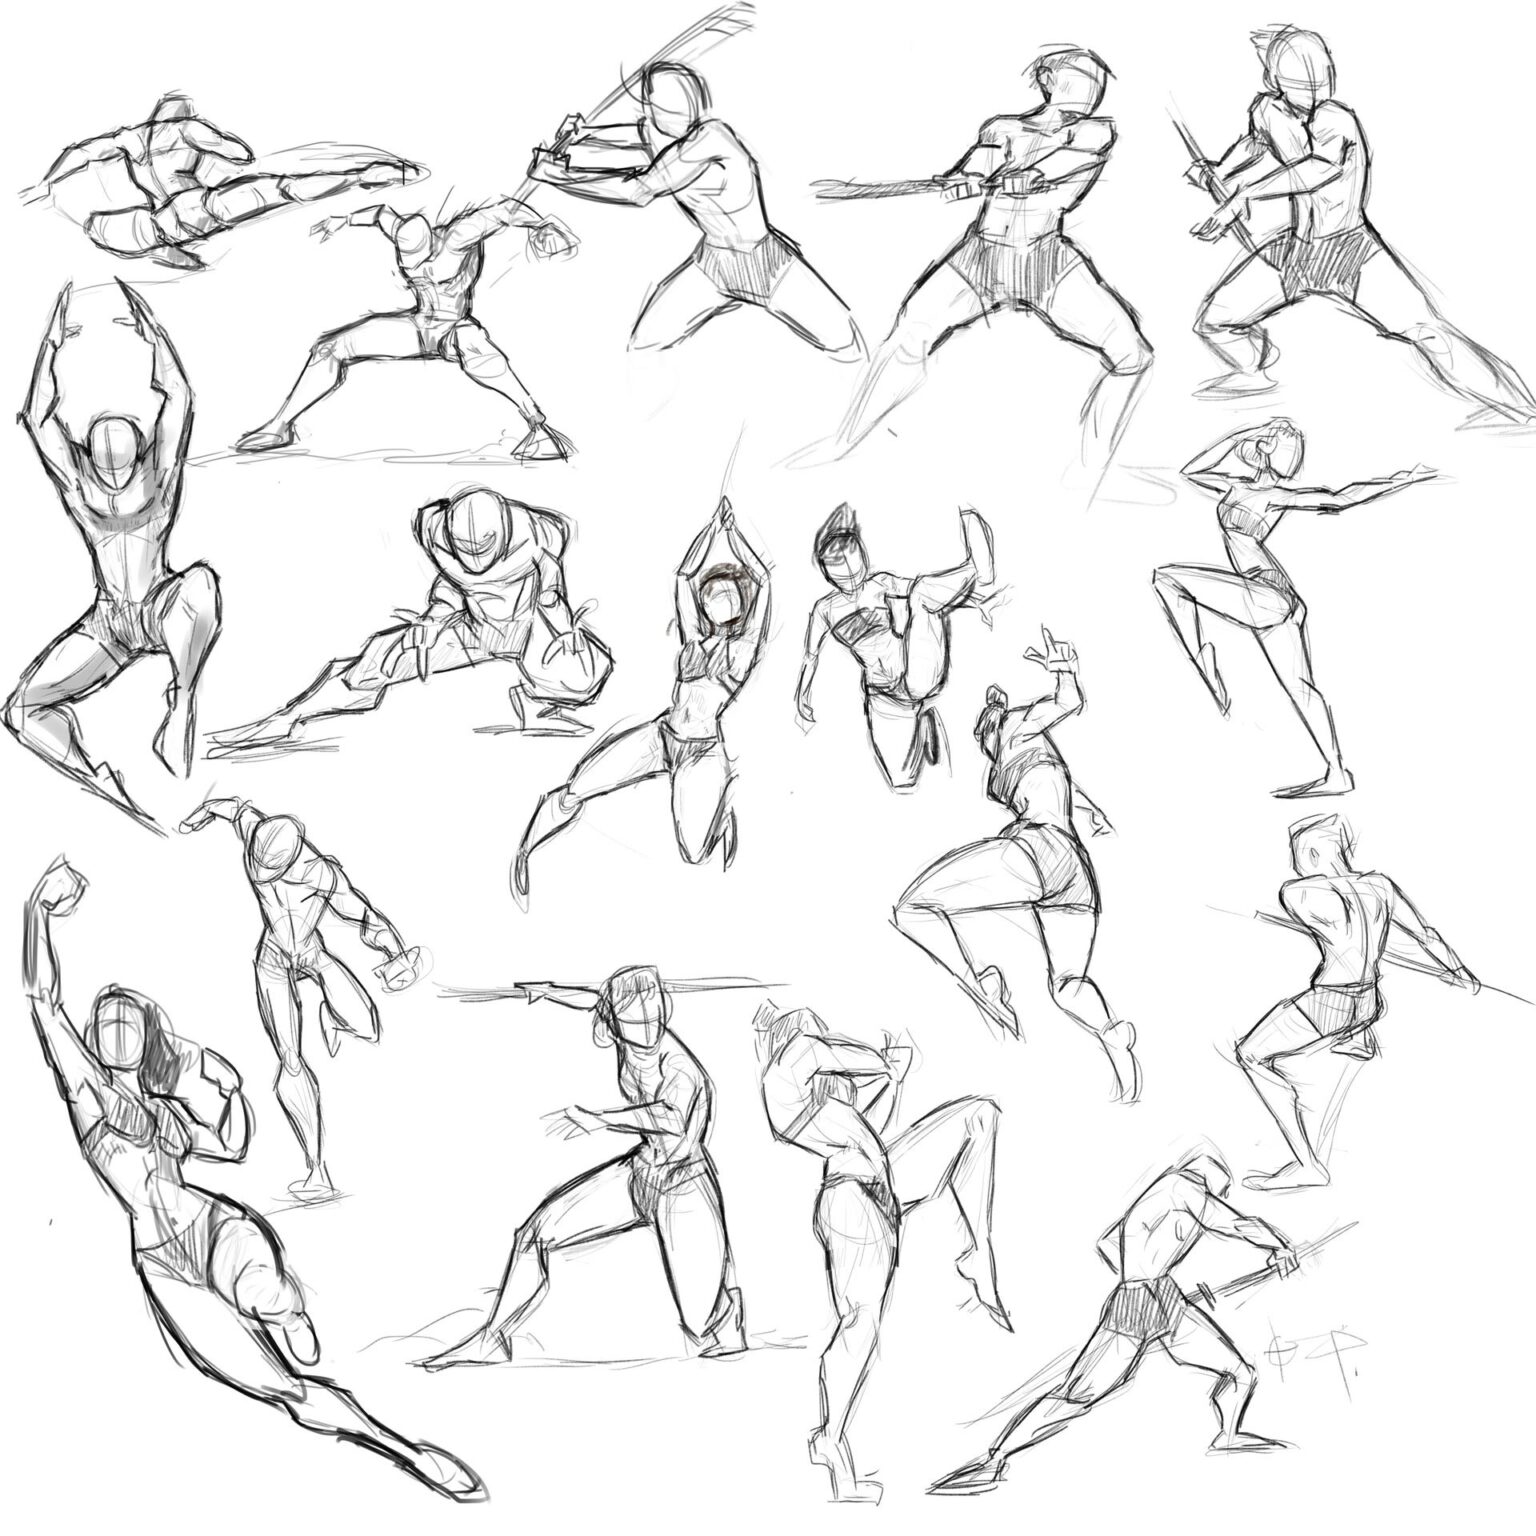 Fighting Drawing Reference and Sketches for Artists.